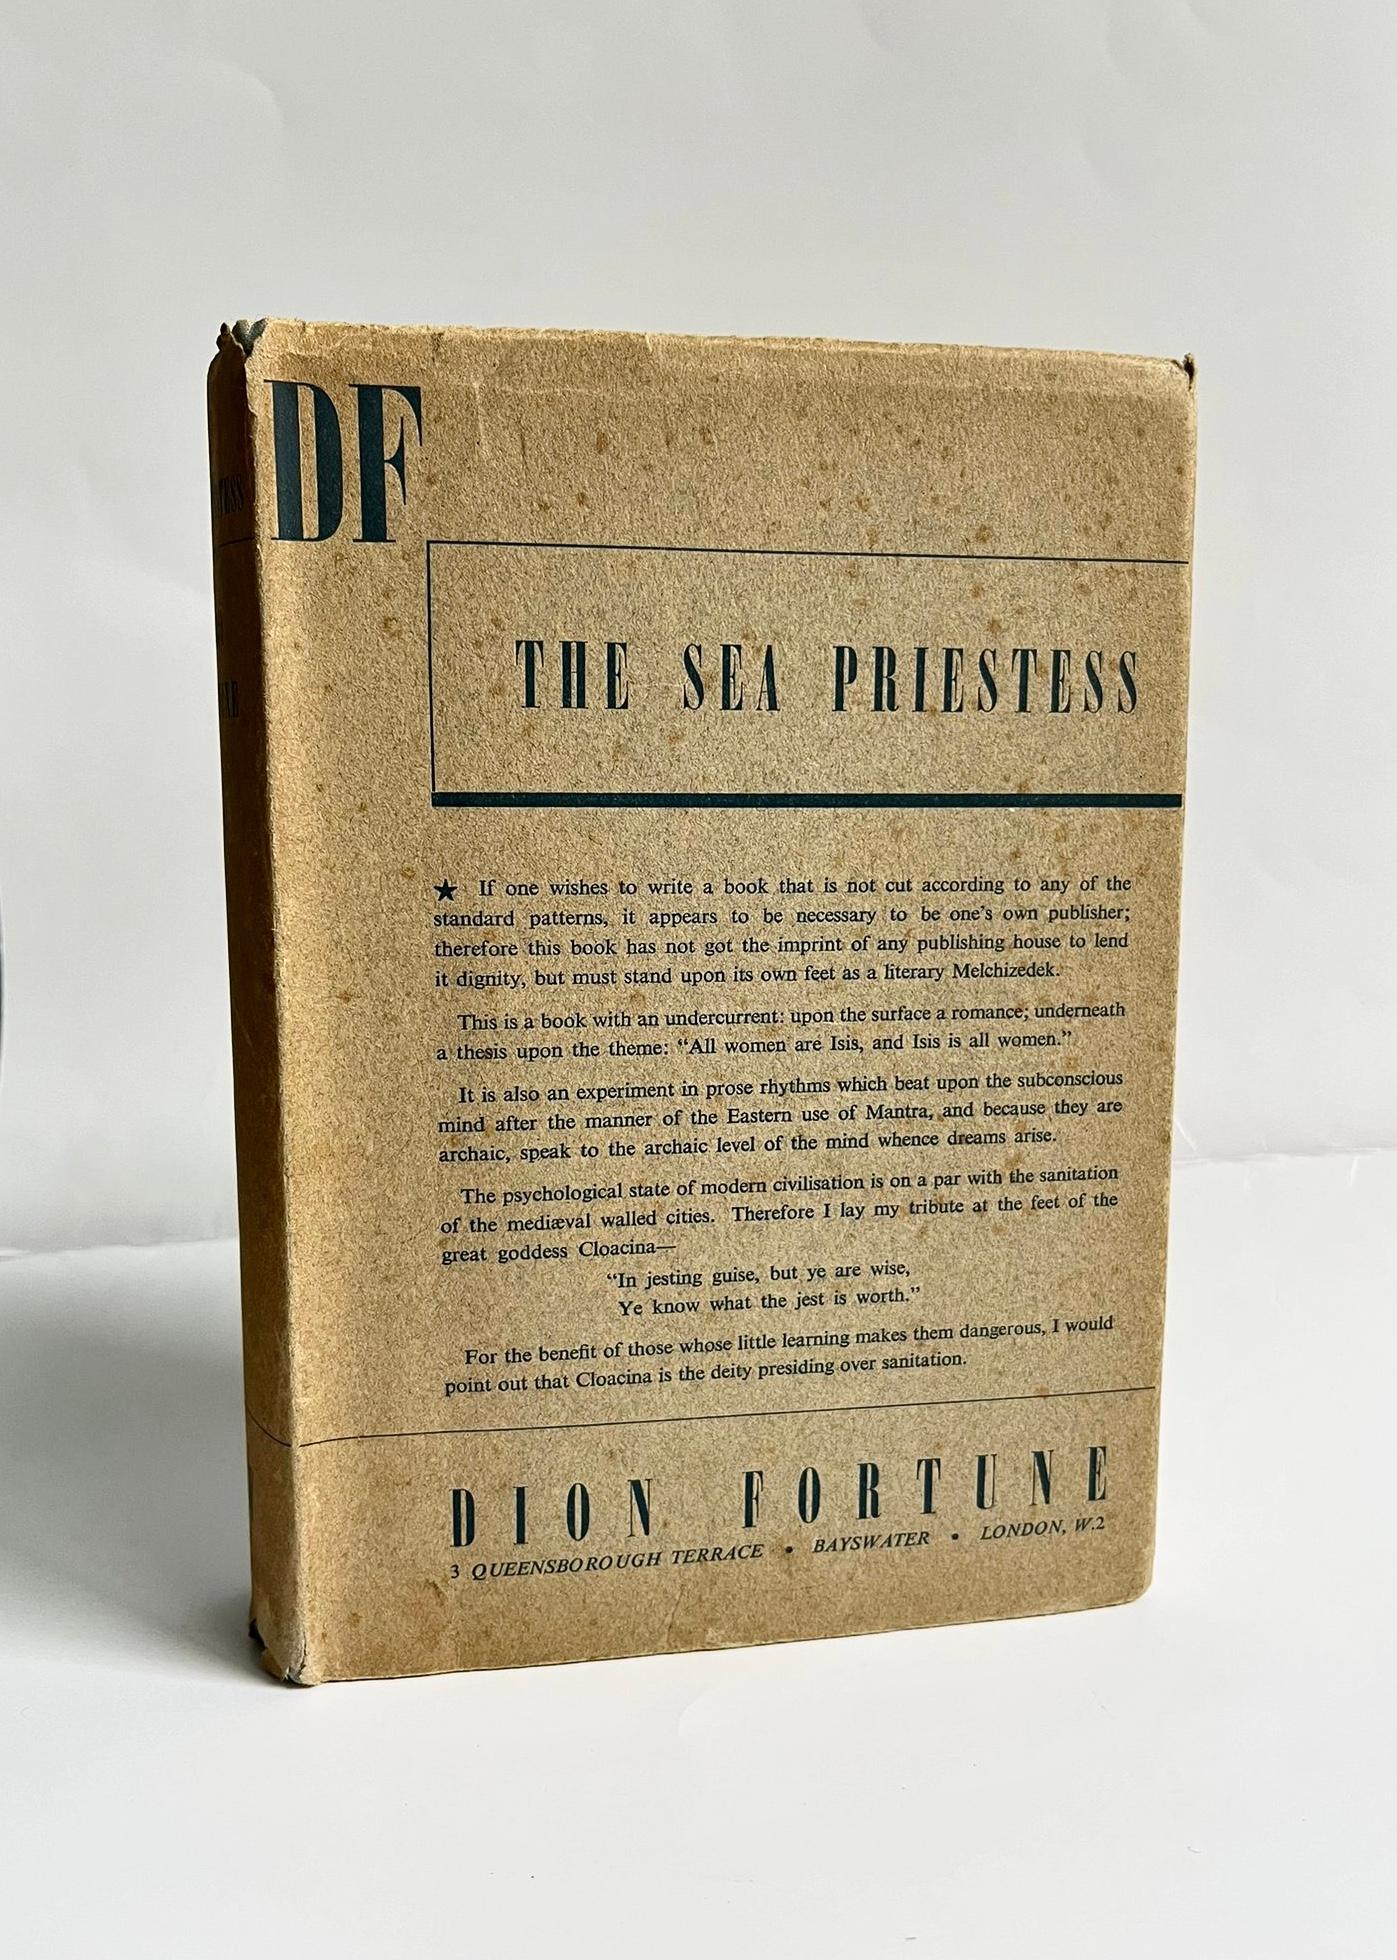 The Sea Priestess by Dion Fortune